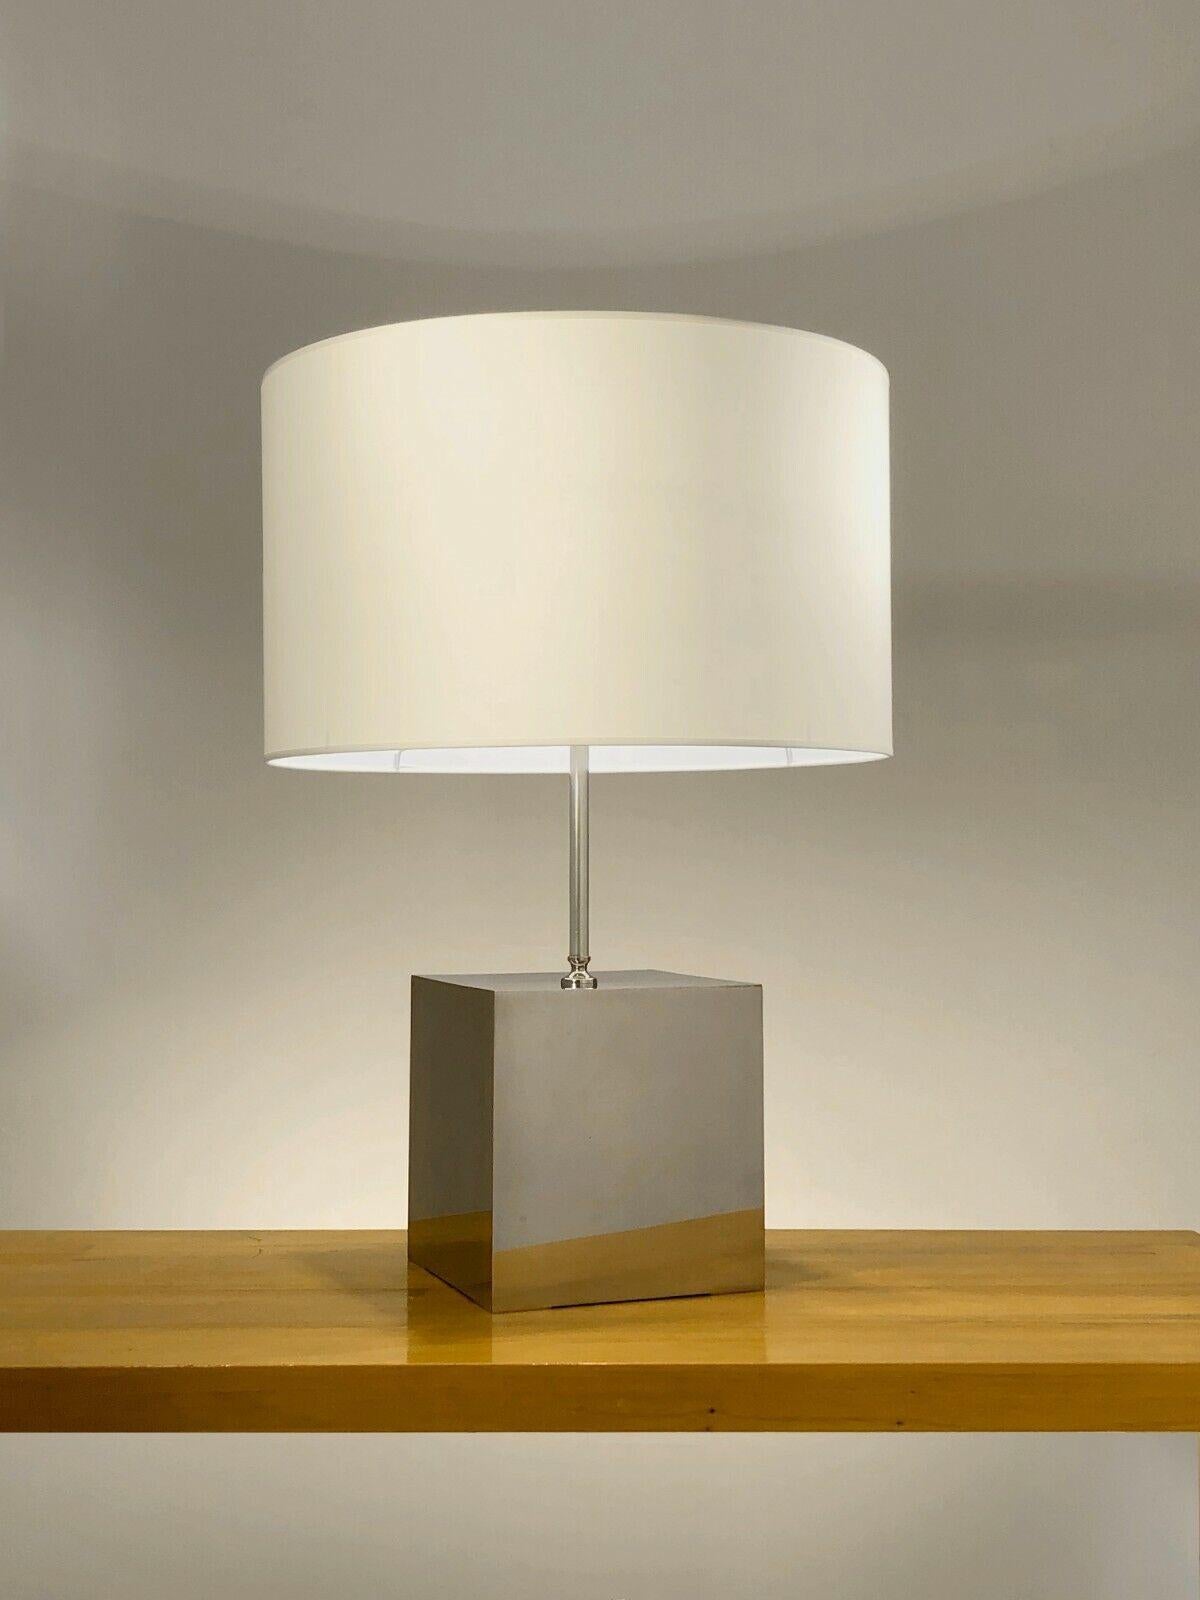 A very large and elegant table lamp, Post-Modernist, large cubic base in thick nickel-plated bronze plates, topped by a thin cylindrical axis and a beautiful circular lampshade, by Philippe Barbier, France 1970.